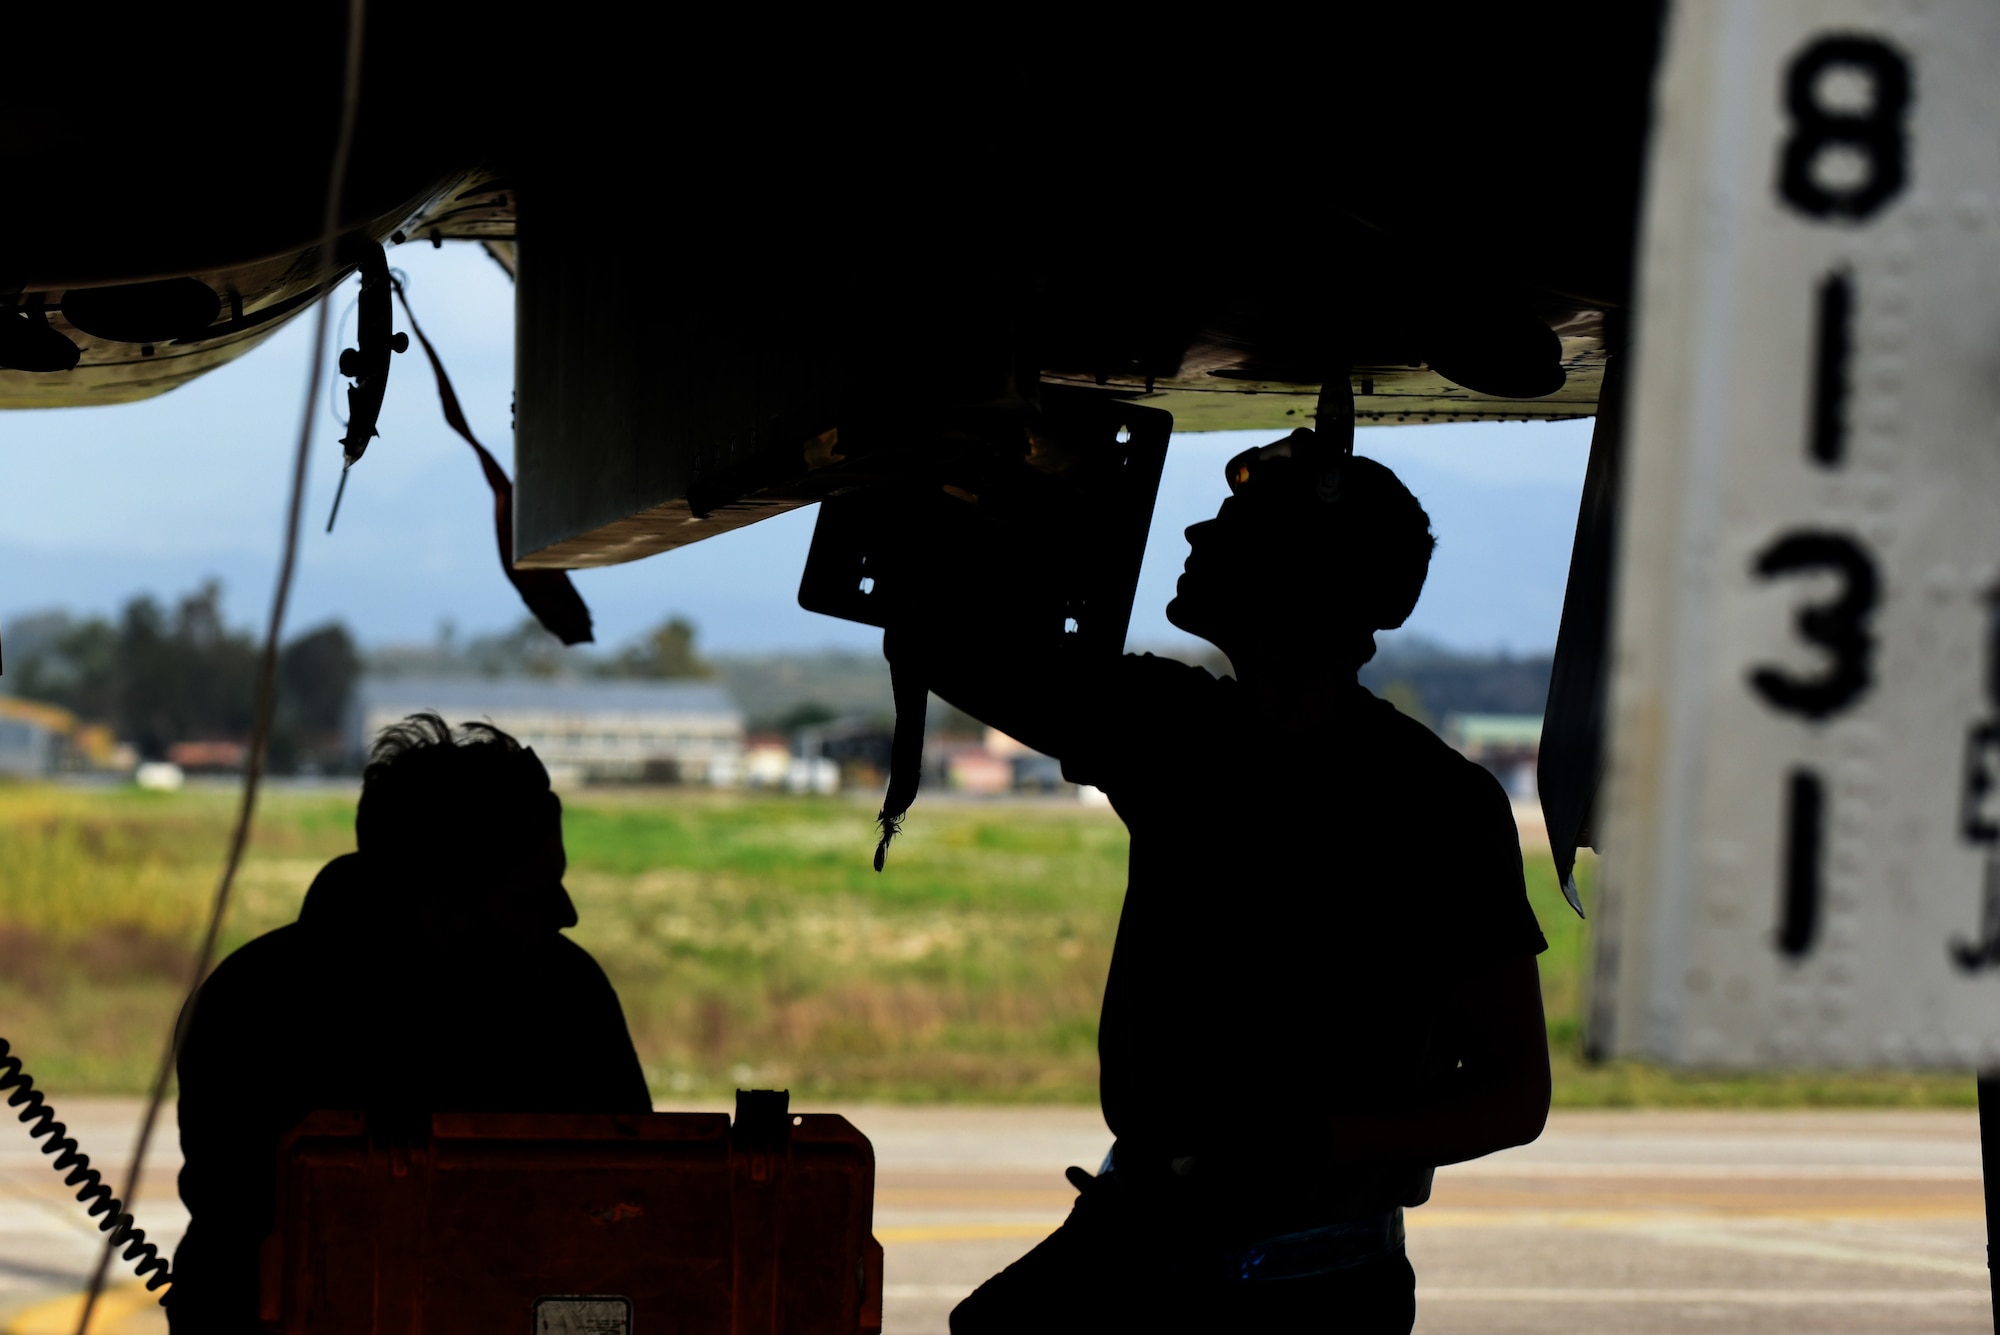 Airmen assigned to the 492nd Aircraft Maintenance Unit perform post-flight checks on an F-15E Strike Eagle at Andravida Air Base, Greece, March 7. The F-15s are scheduled to participate in INIOHOS 18, a Hellenic Air Force-led, large force flying exercise that is slated to involve seven countries and over 50 aircraft. (U.S. Air Force photo/Airman 1st Class Eli Chevalier)